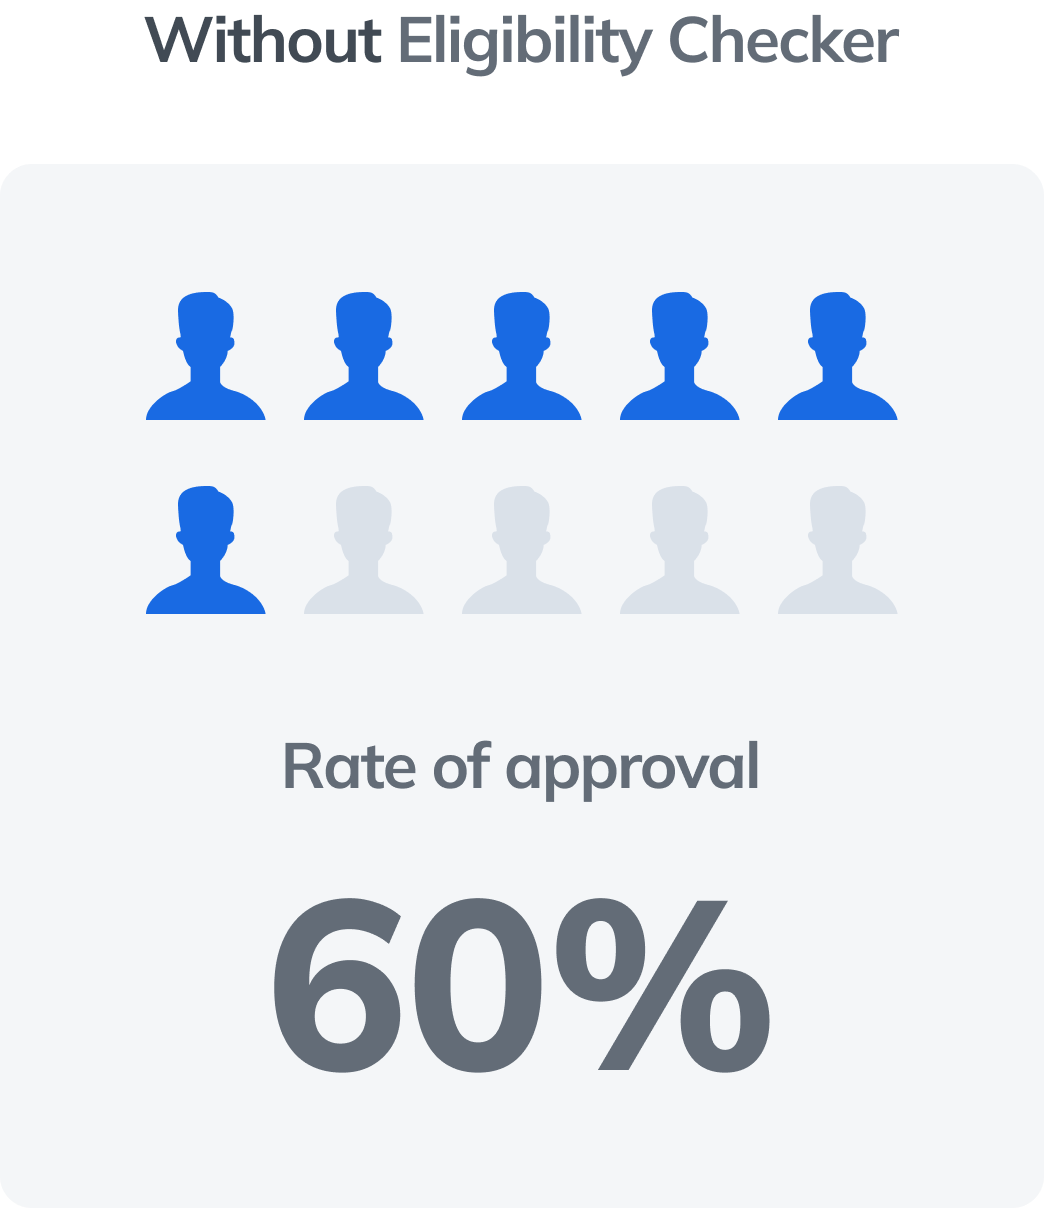 Rate of approval 60%